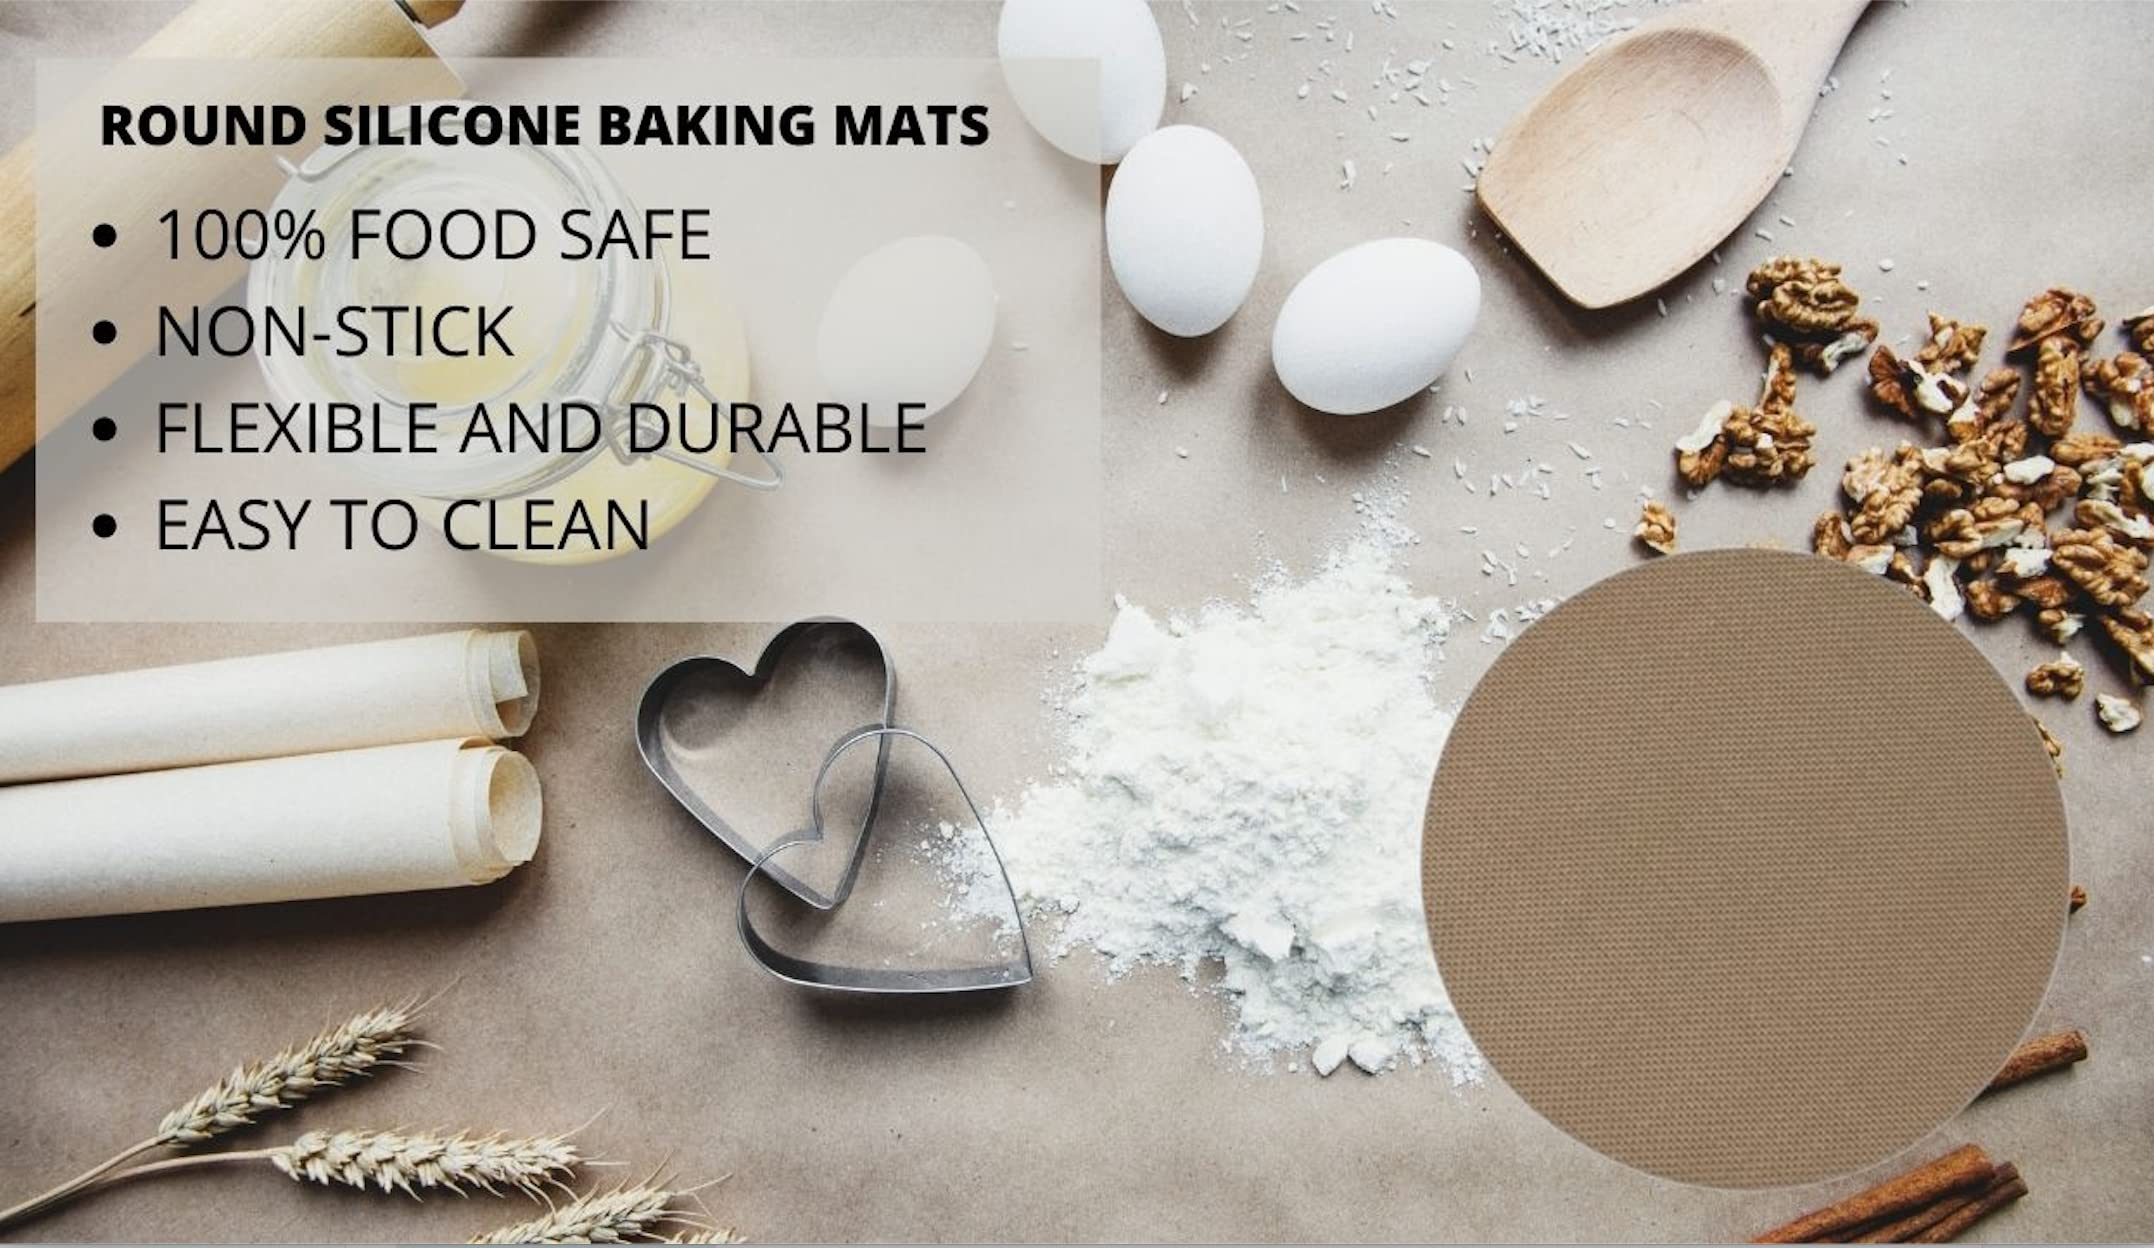 2-pack Non-Stick Silicon Baking Mat (Circular, 8 inch) BPA Free, Reusable and easy to Wash. Great for Baking, Pizza, Tortillas and More!